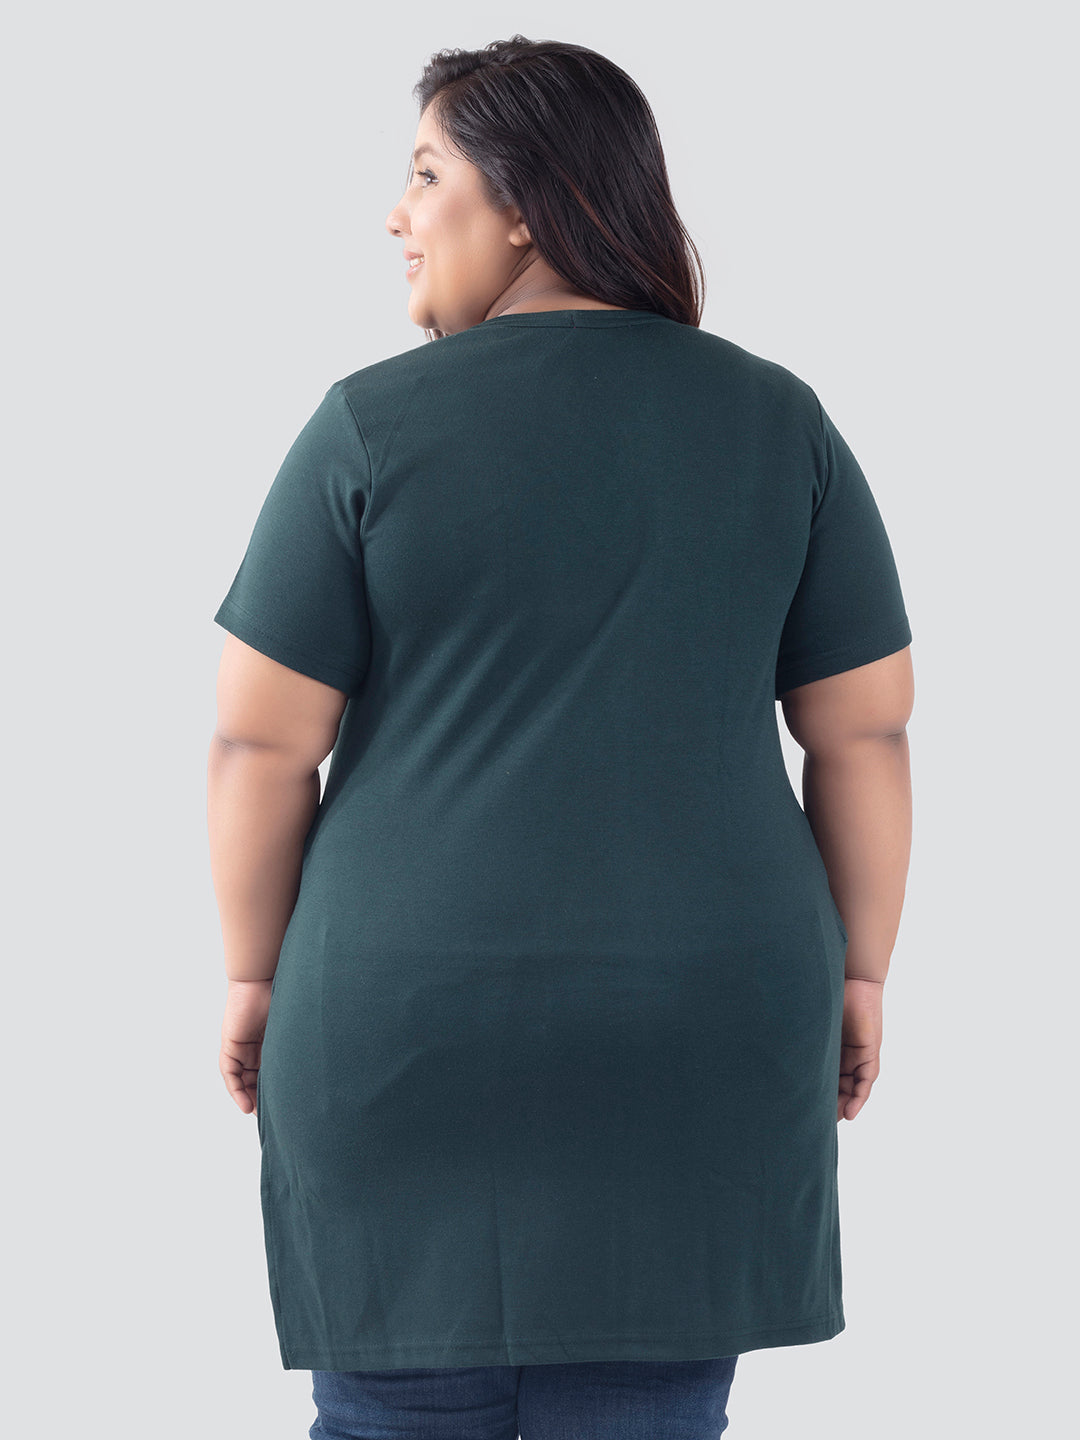 Stylish Bottle Green Cotton Plus Size Half Sleeves Long Top For Women Online In India